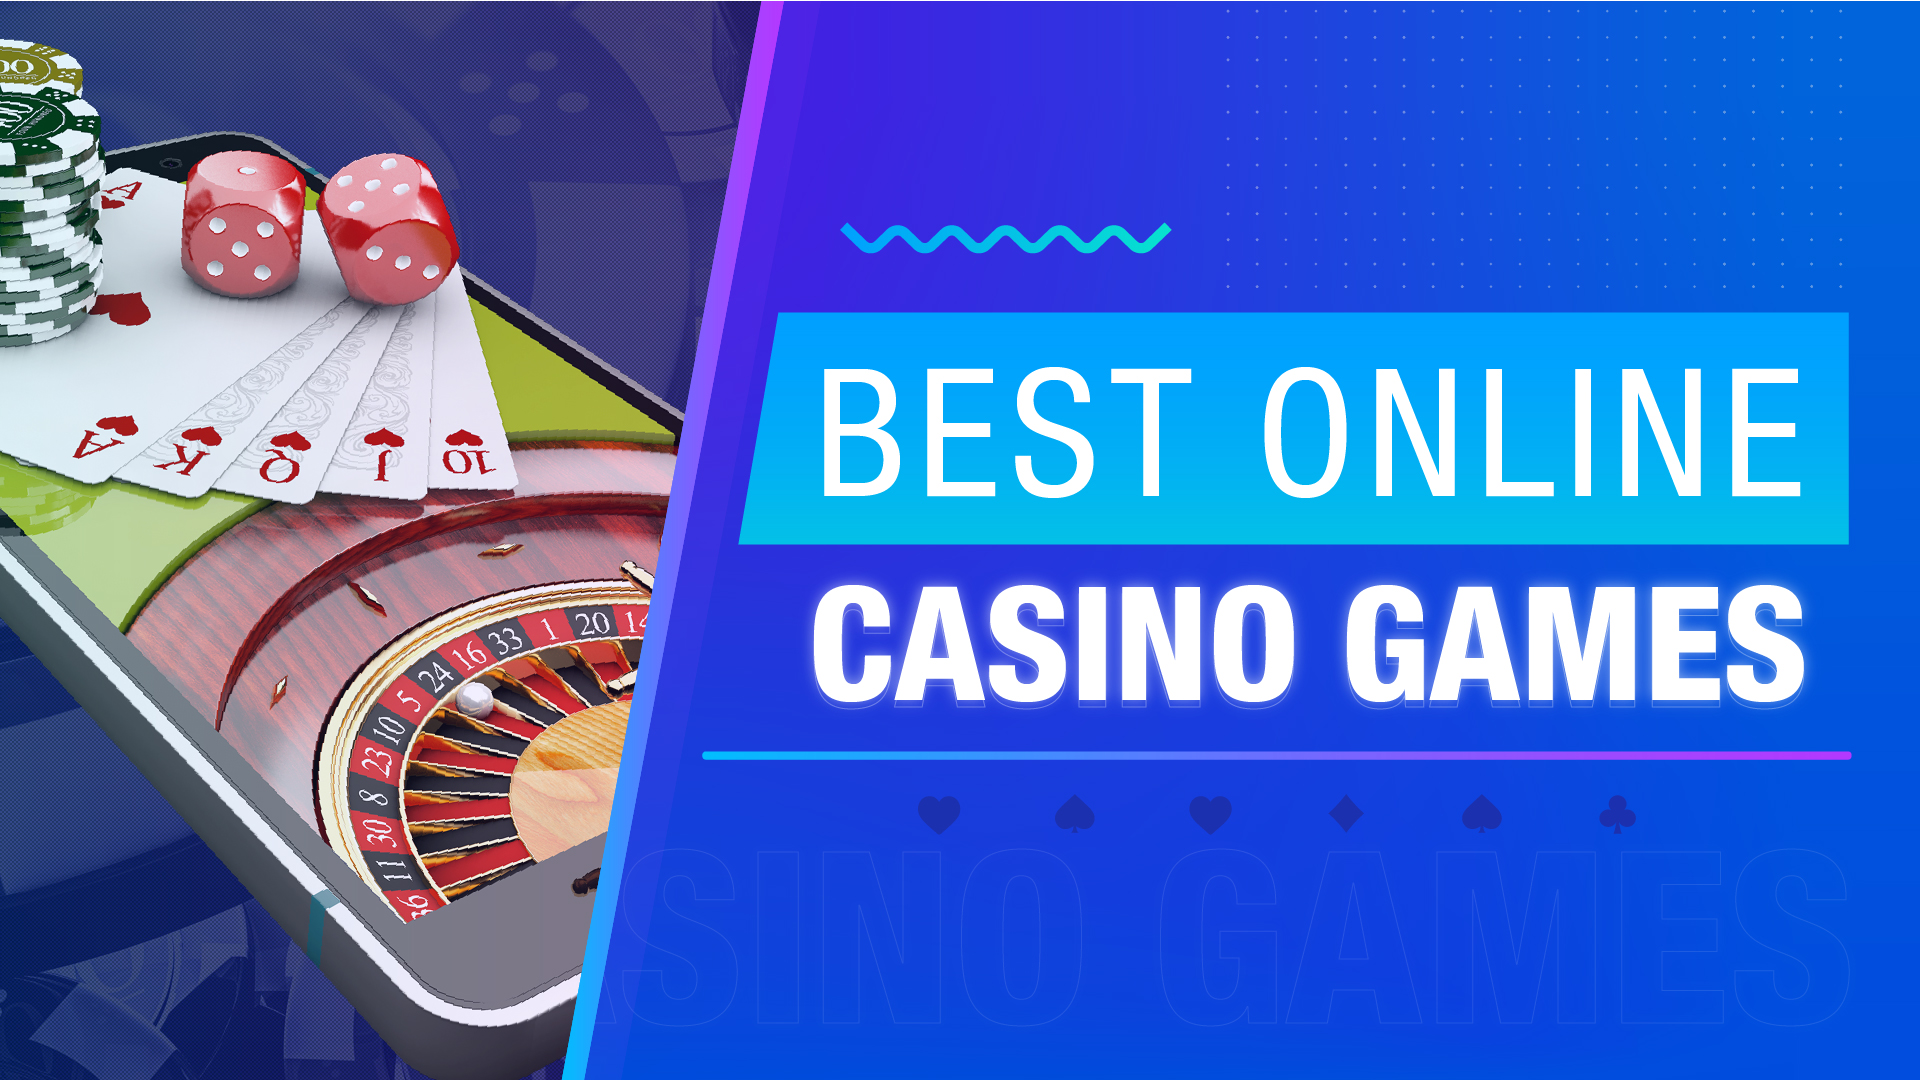 Target site online casino entry required